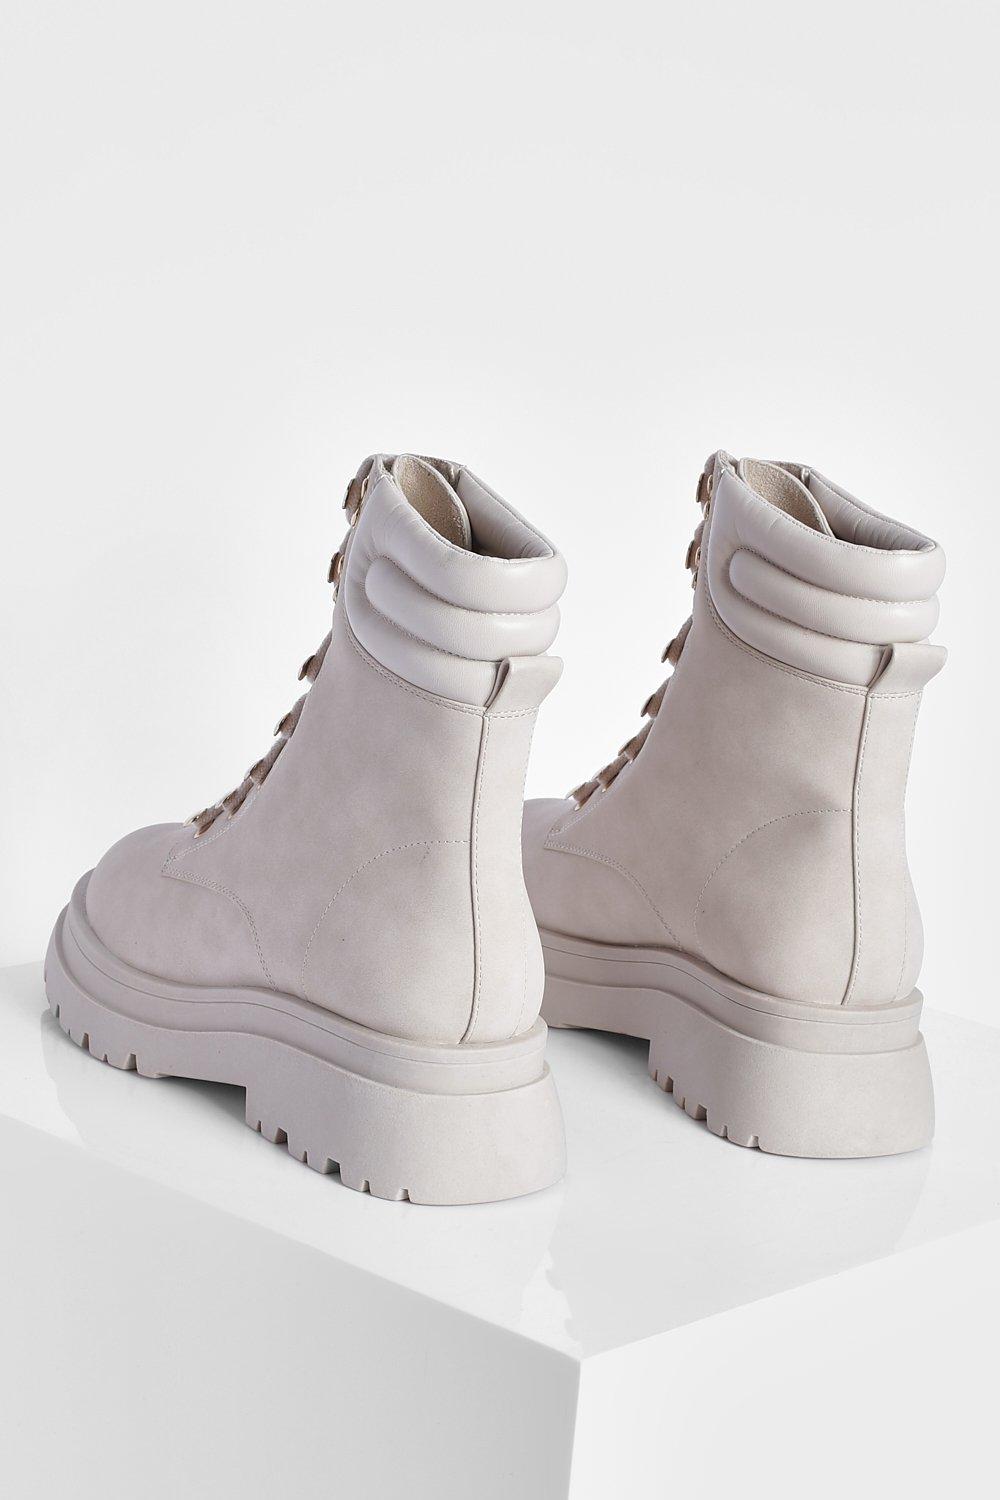 Cleated Sole Lace Up Hiker Boots | boohoo